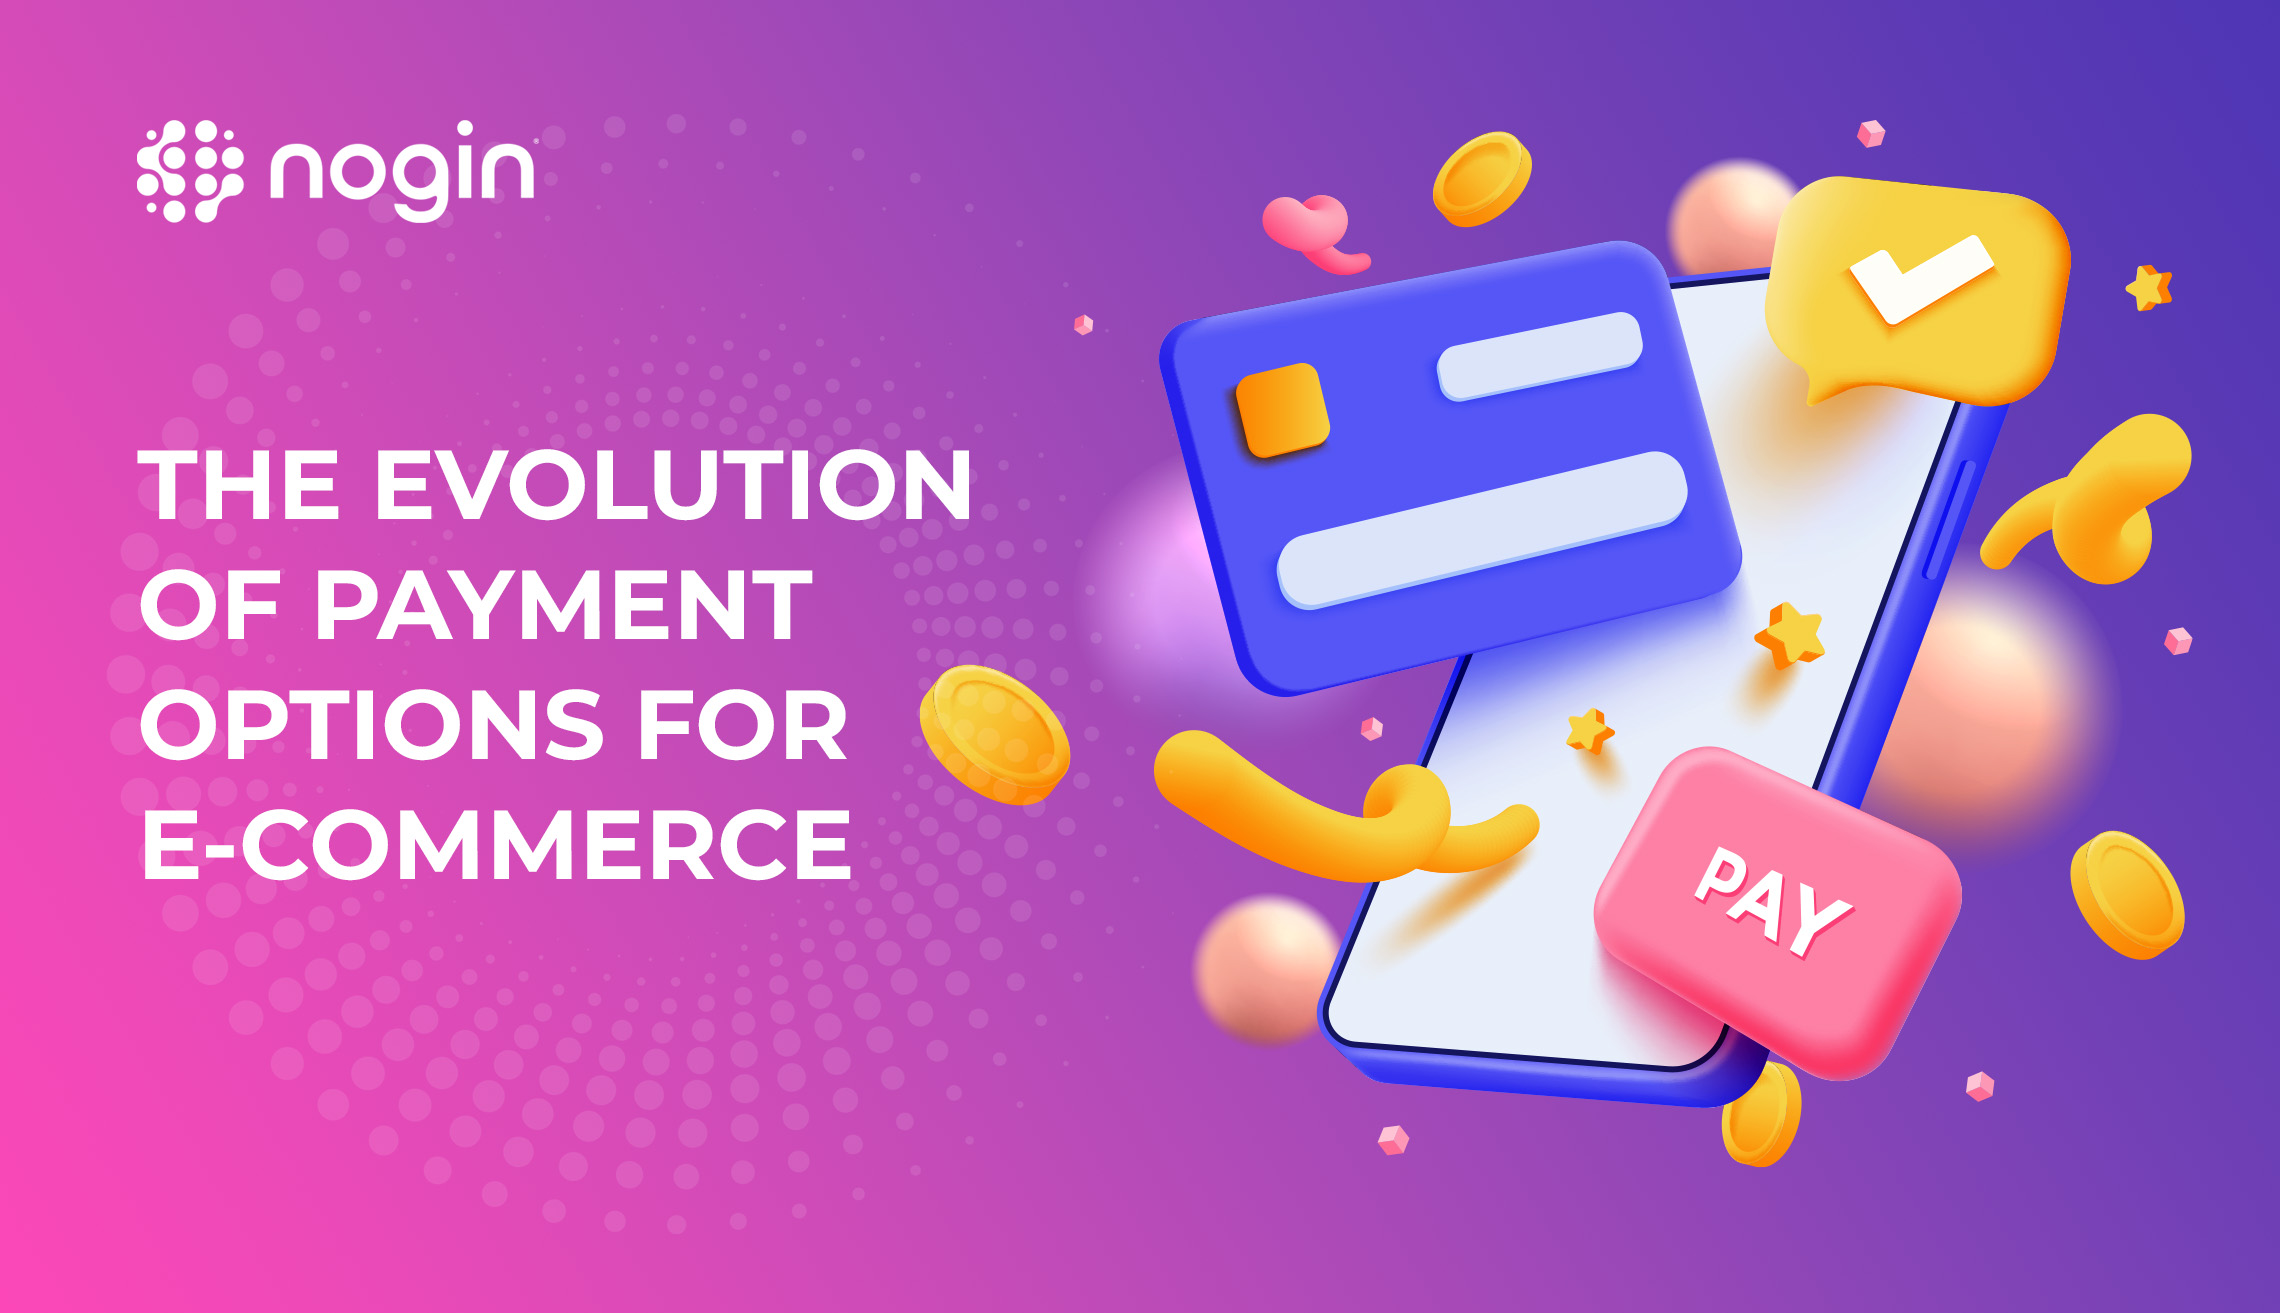 The evolution of payment options for e-commerce